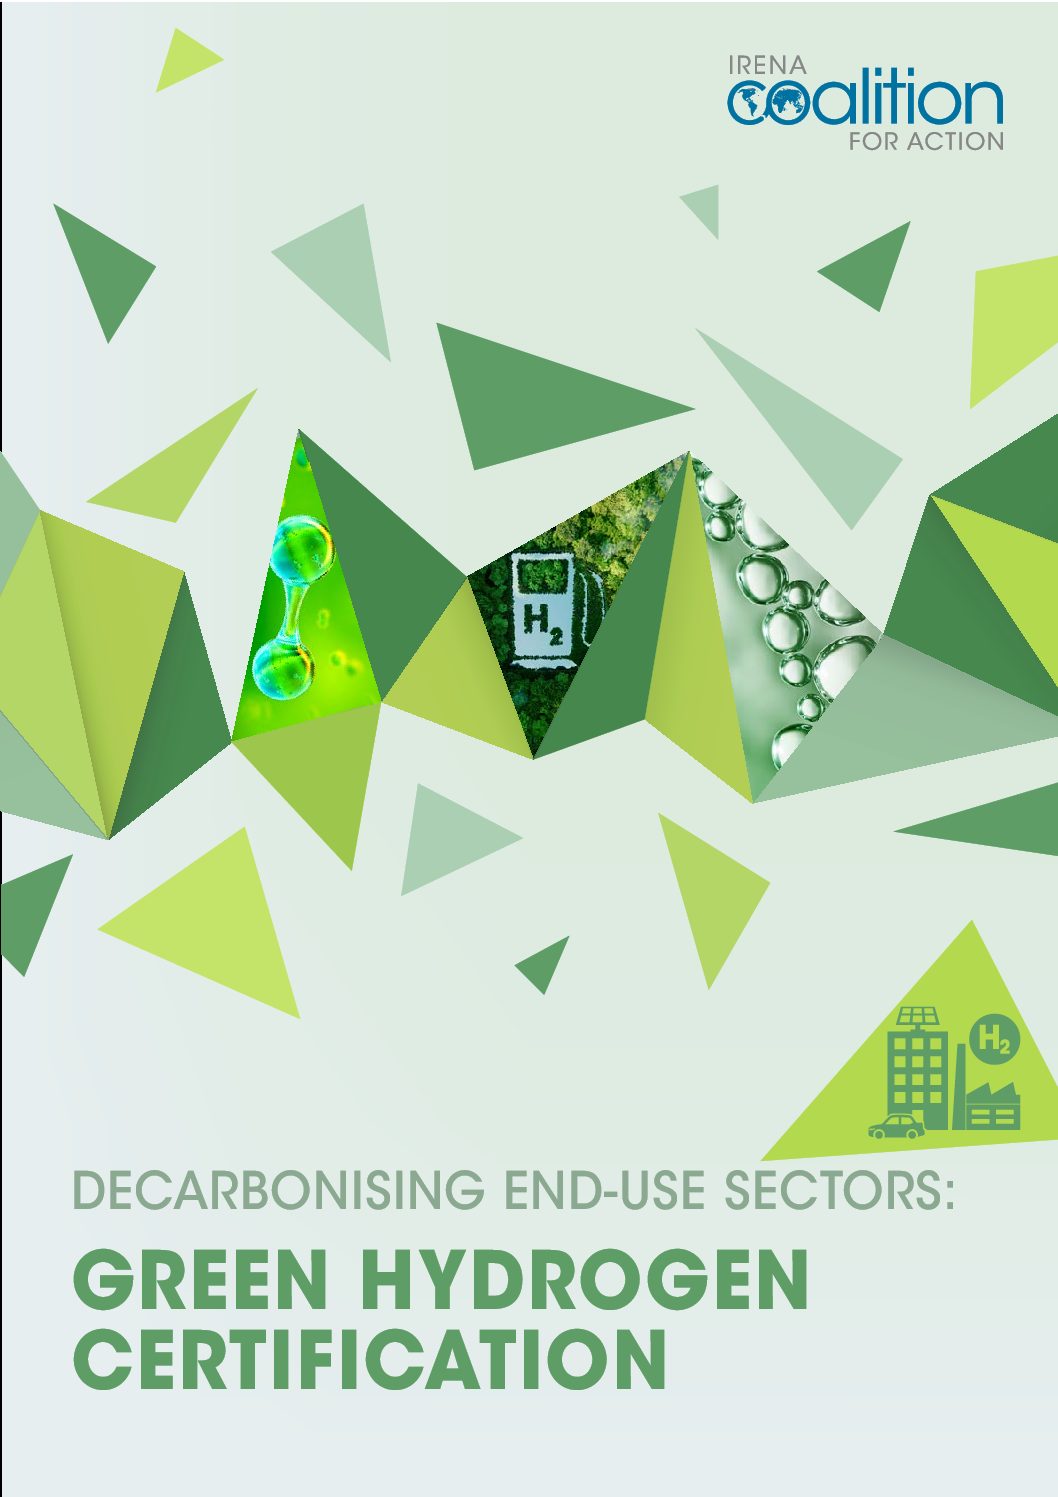 Decarbonising end-use sectors: Green hydrogen certification